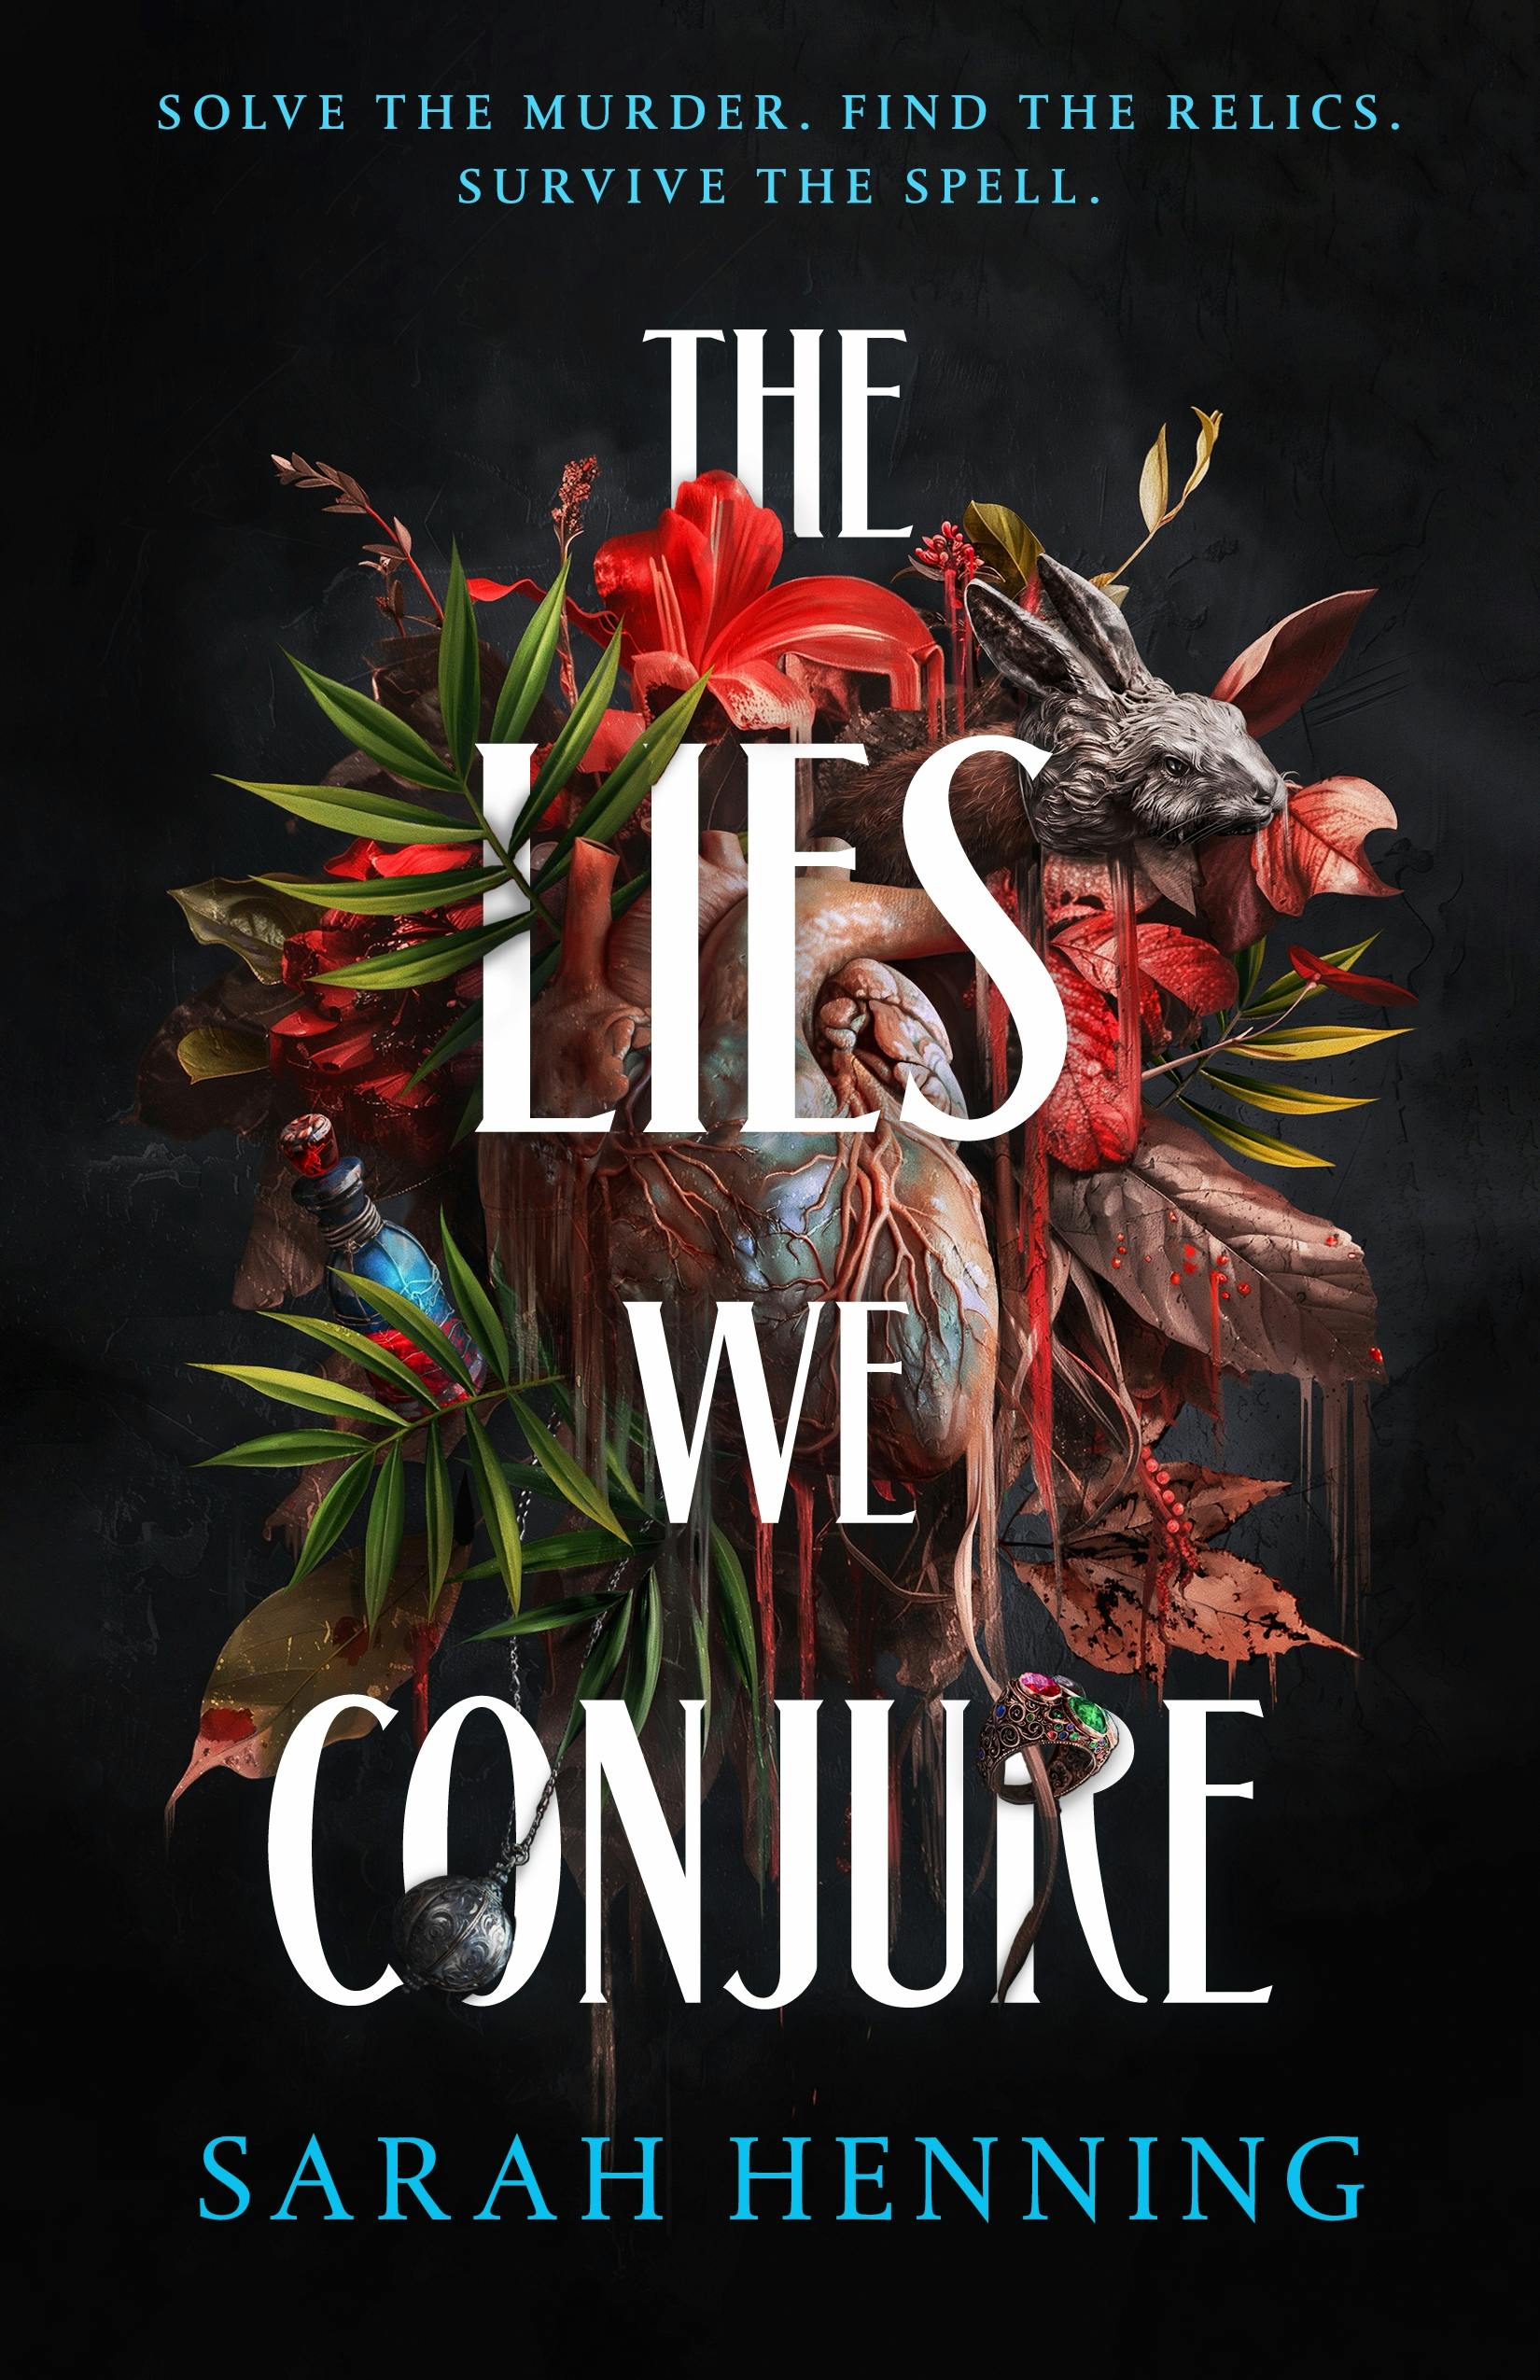 Cover for the book titled as: The Lies We Conjure